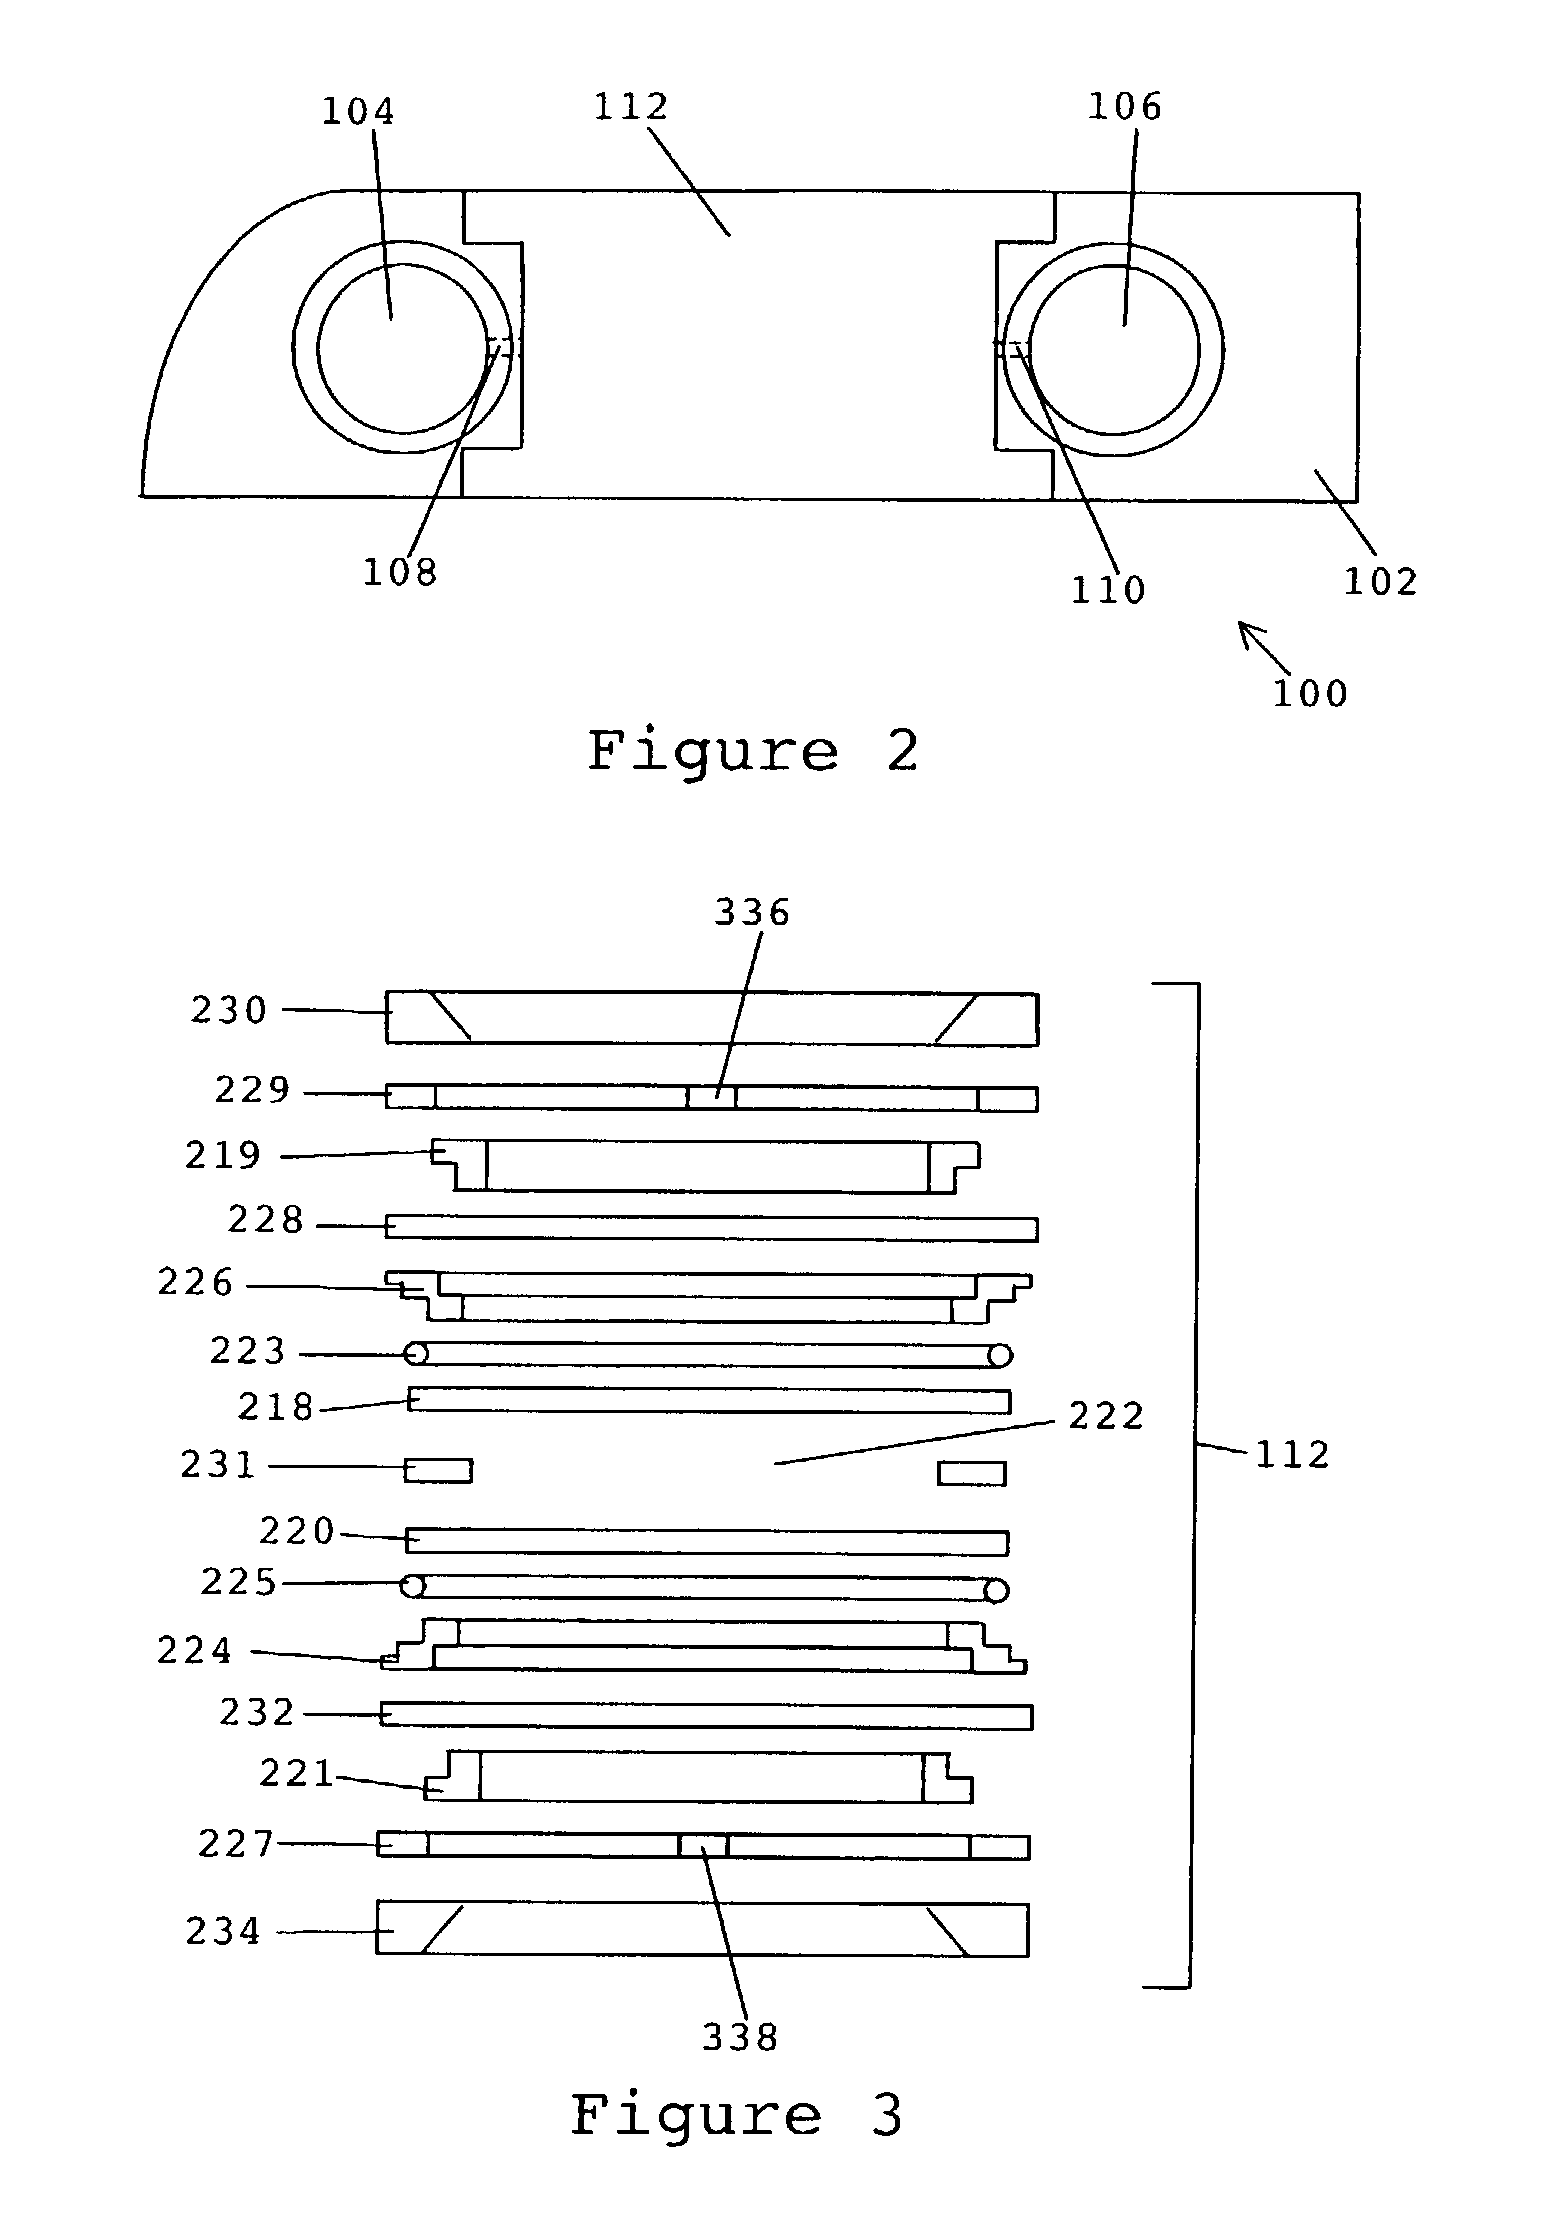 Ionic pre-concentration XRF identification and analysis device, system and method